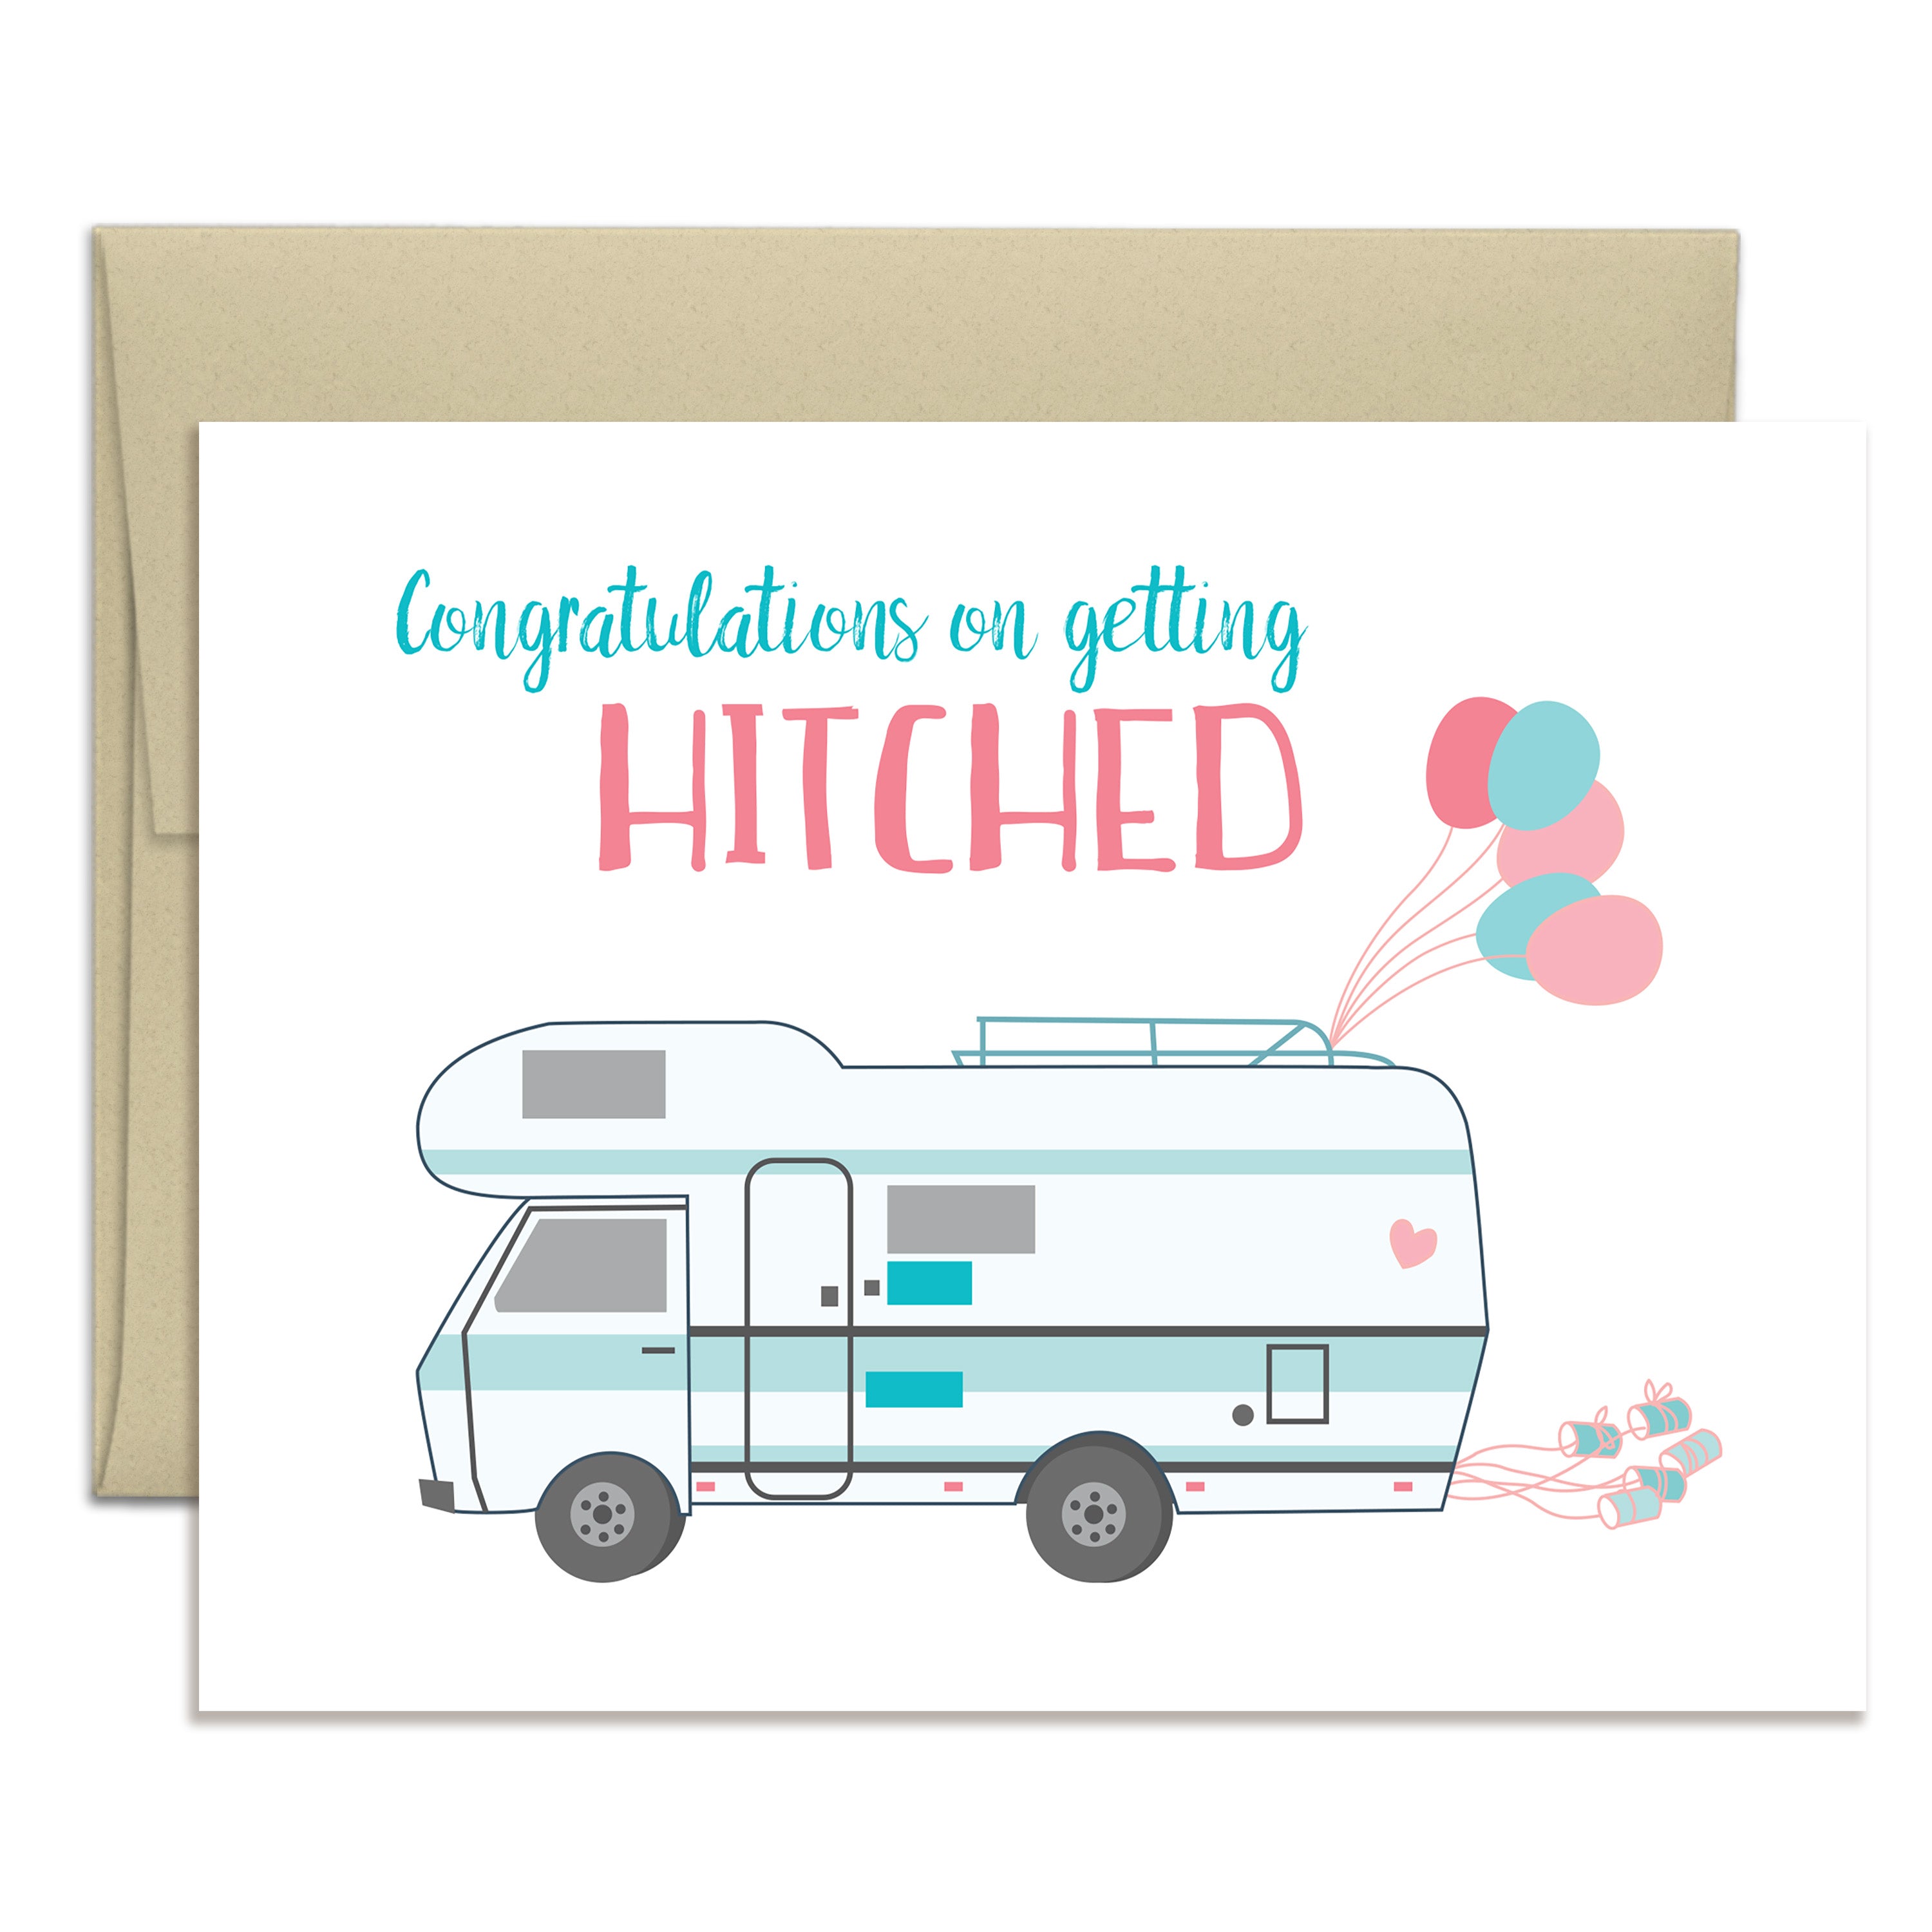 Wedding Congrats Card - Congratulations on Getting Hitched